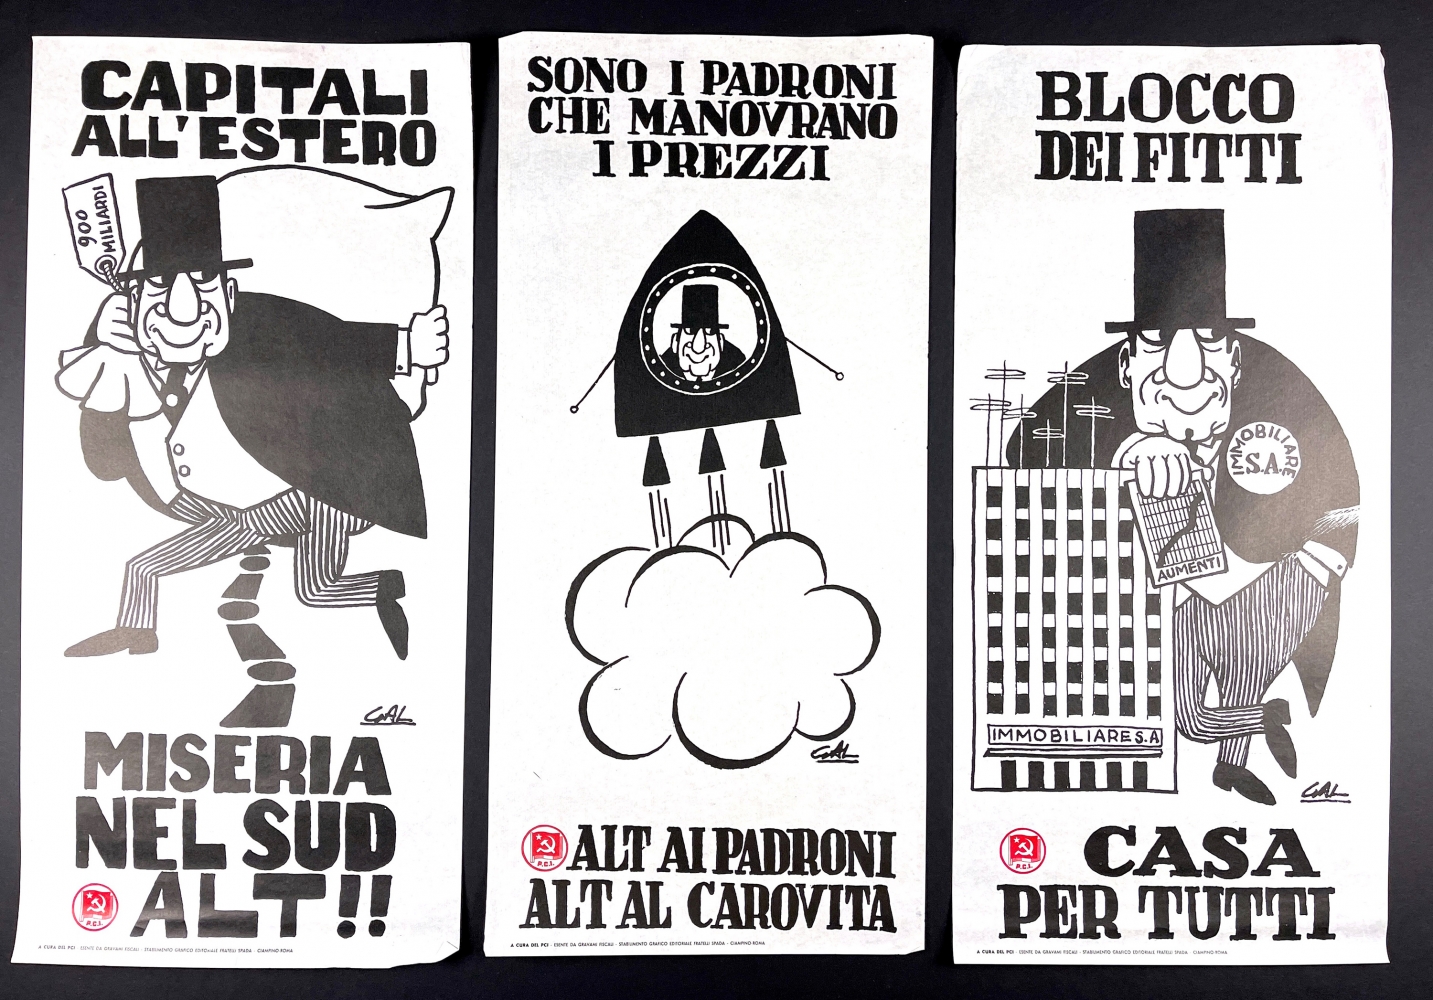 Collection of six posters, ca. 1968, for the Italian Communist Party